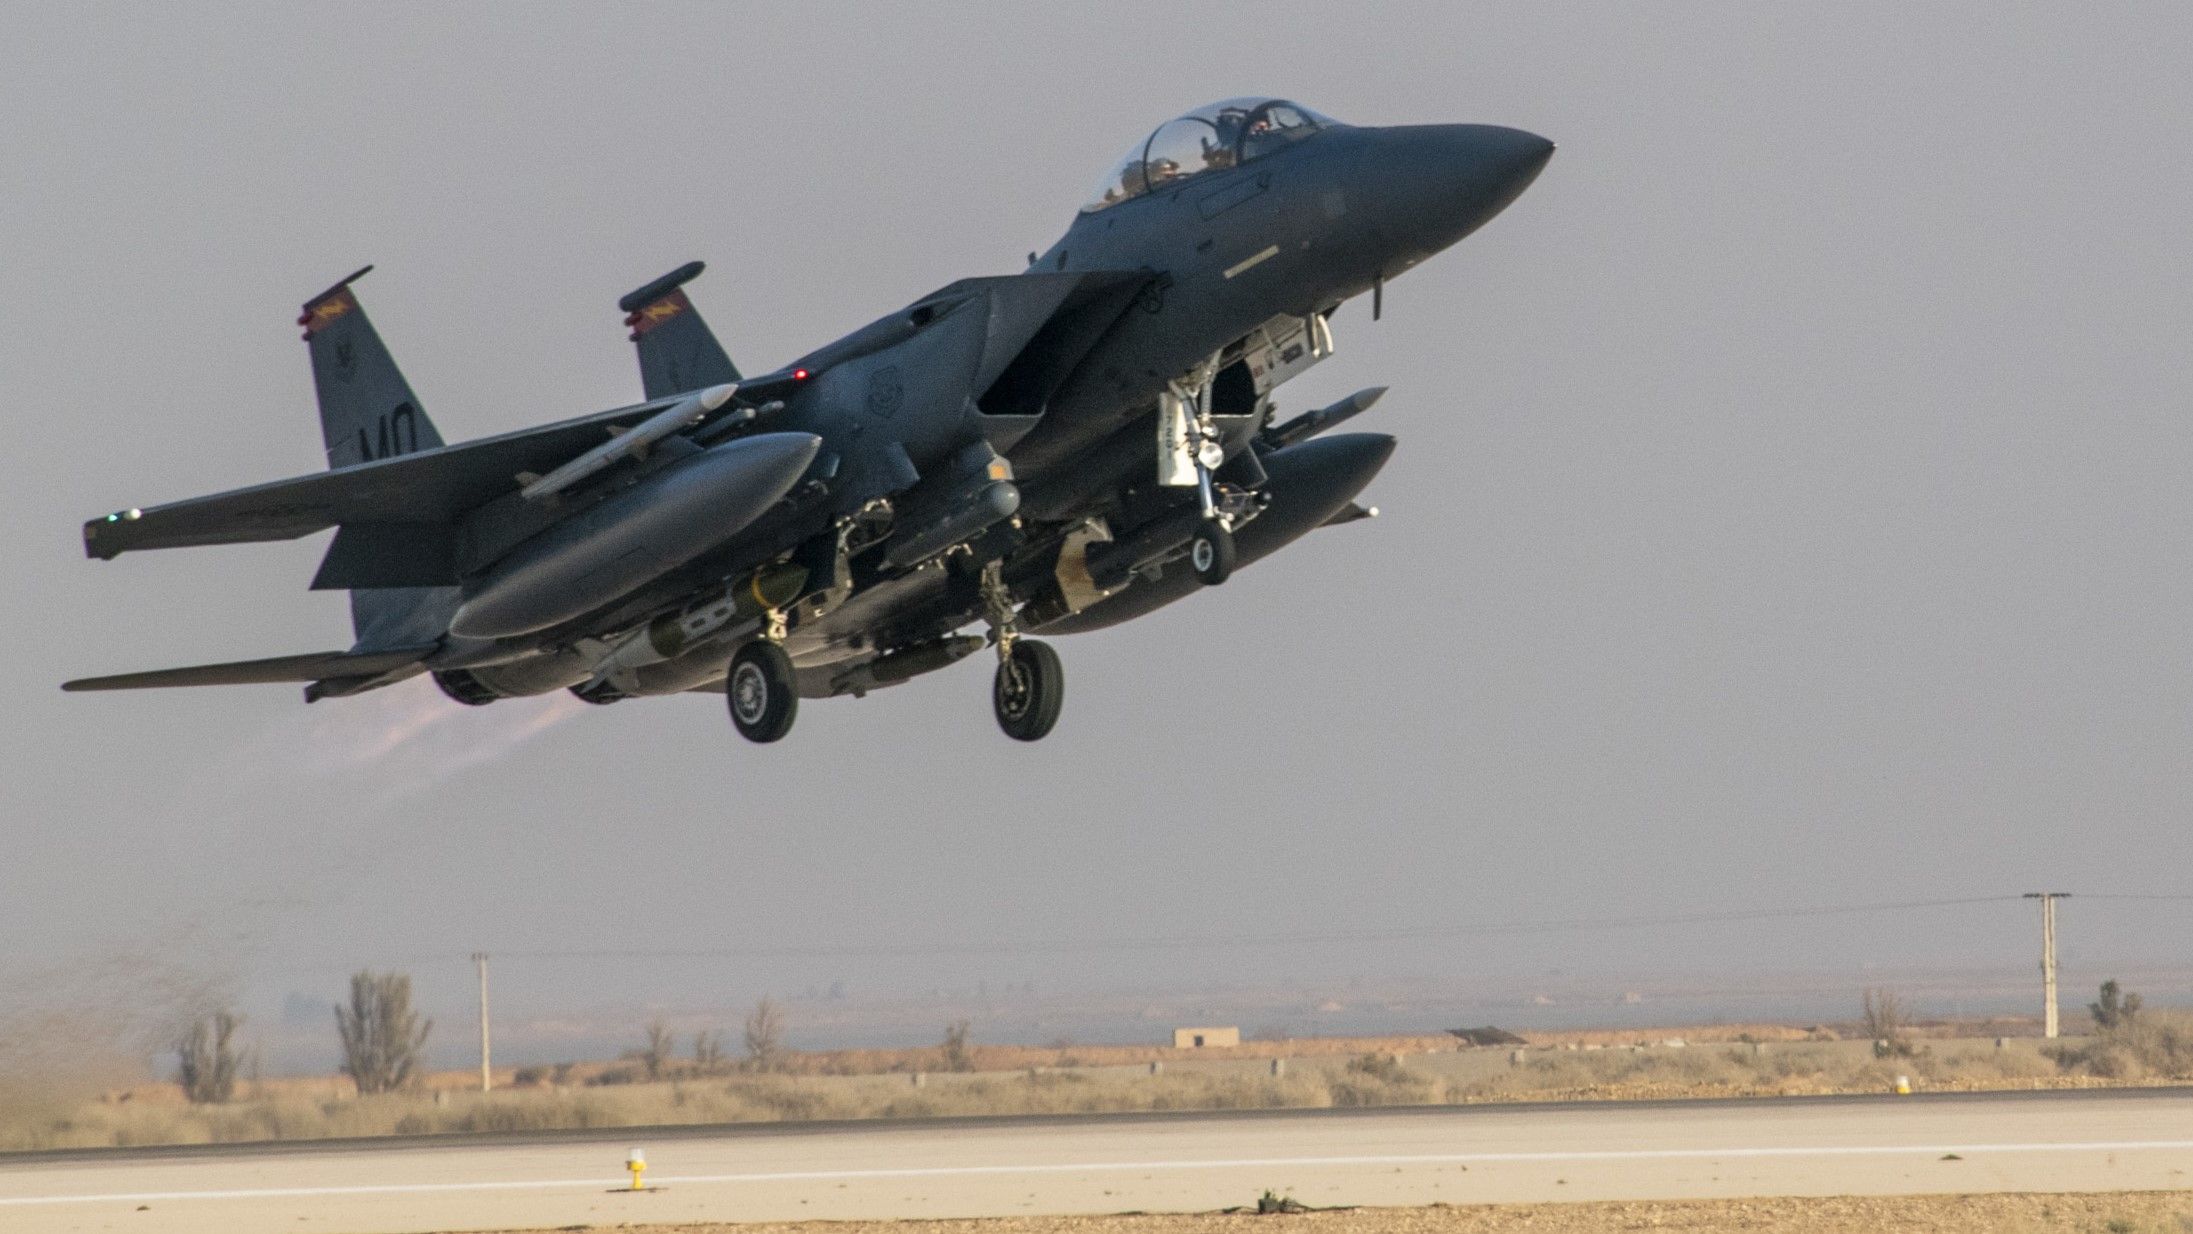 6104595 - 16x9 - U.S. Air Force F-15E Strike Eagle takes off from the 332d Air Expeditionary Wing February 13, 2020